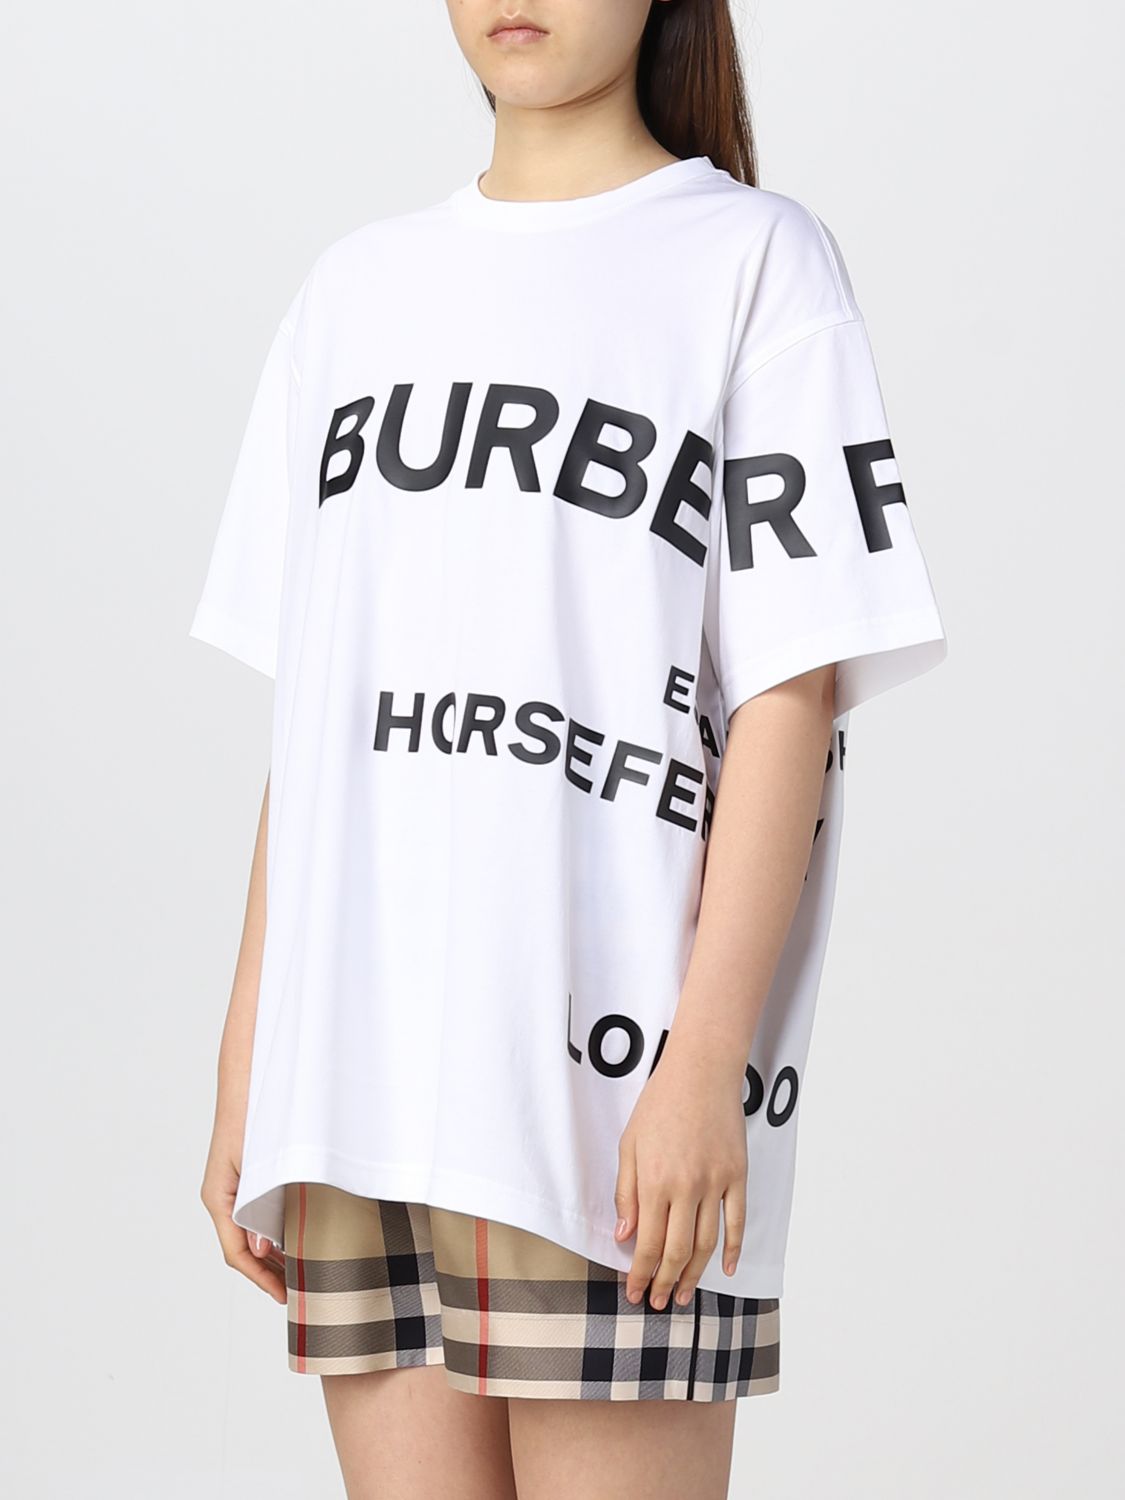 Burberry Horseferry t-shirt in cotton